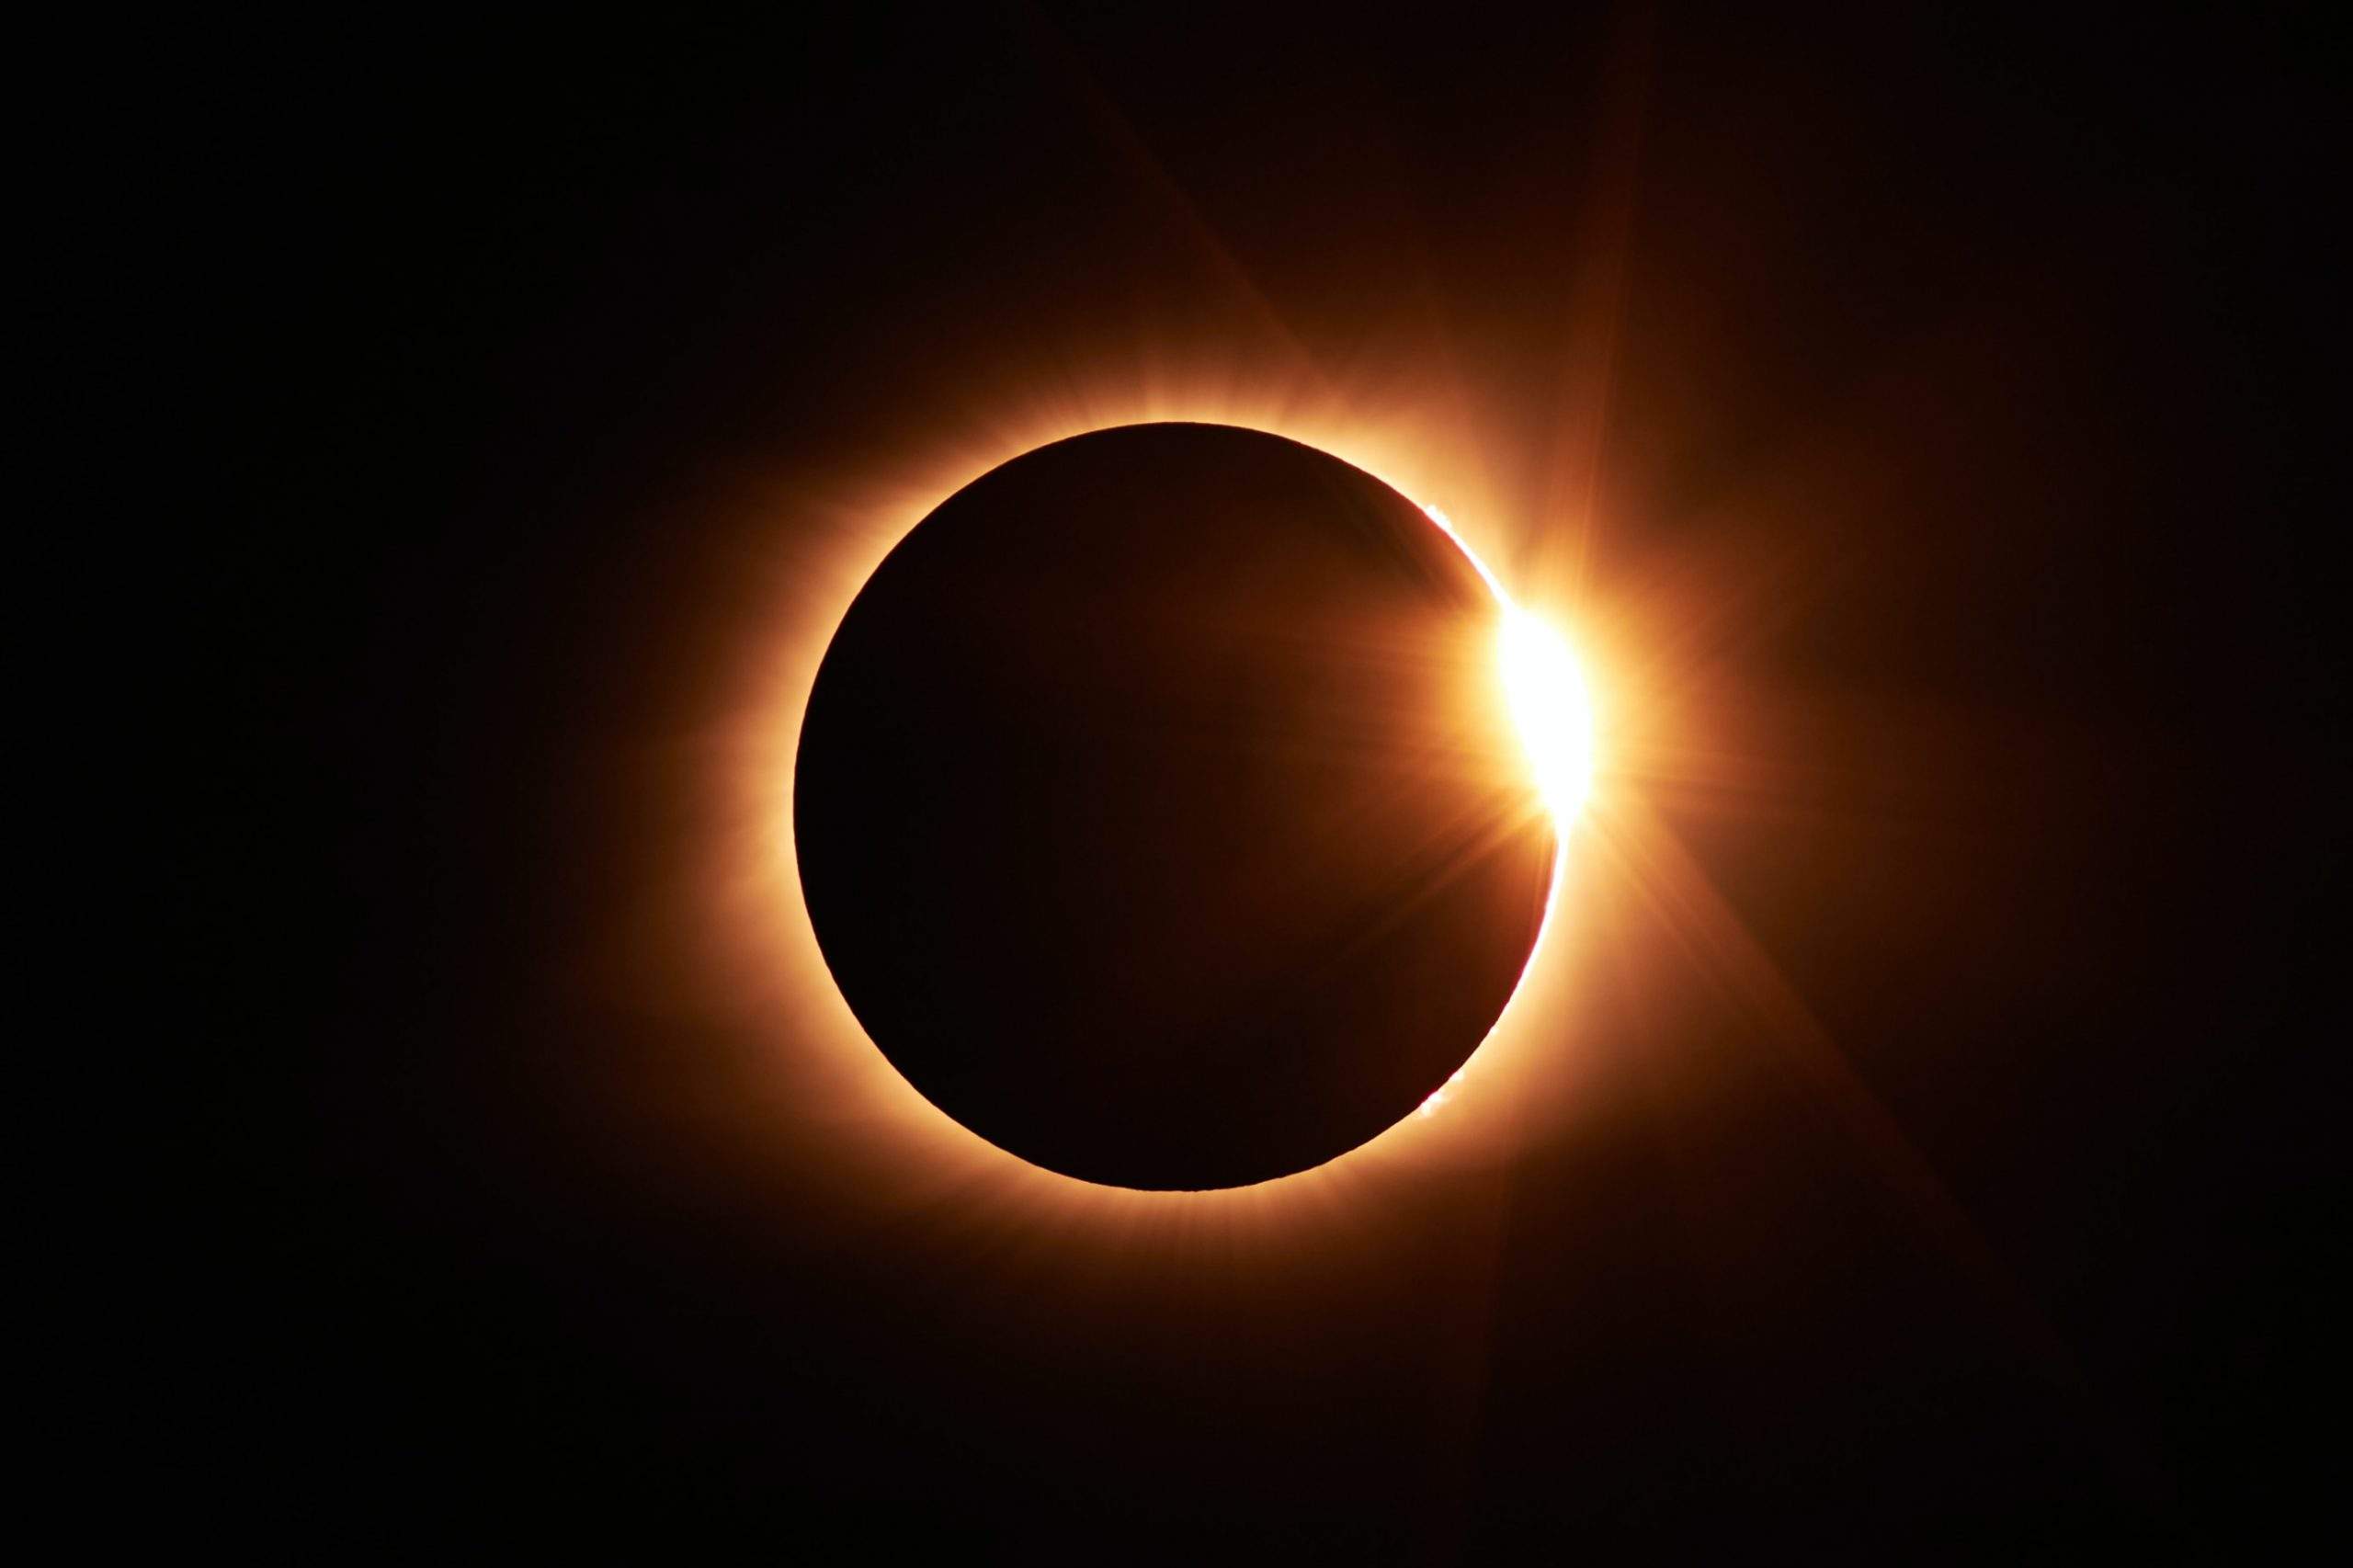 Why An RV Is The Best Way To See Solar Eclipse 2023